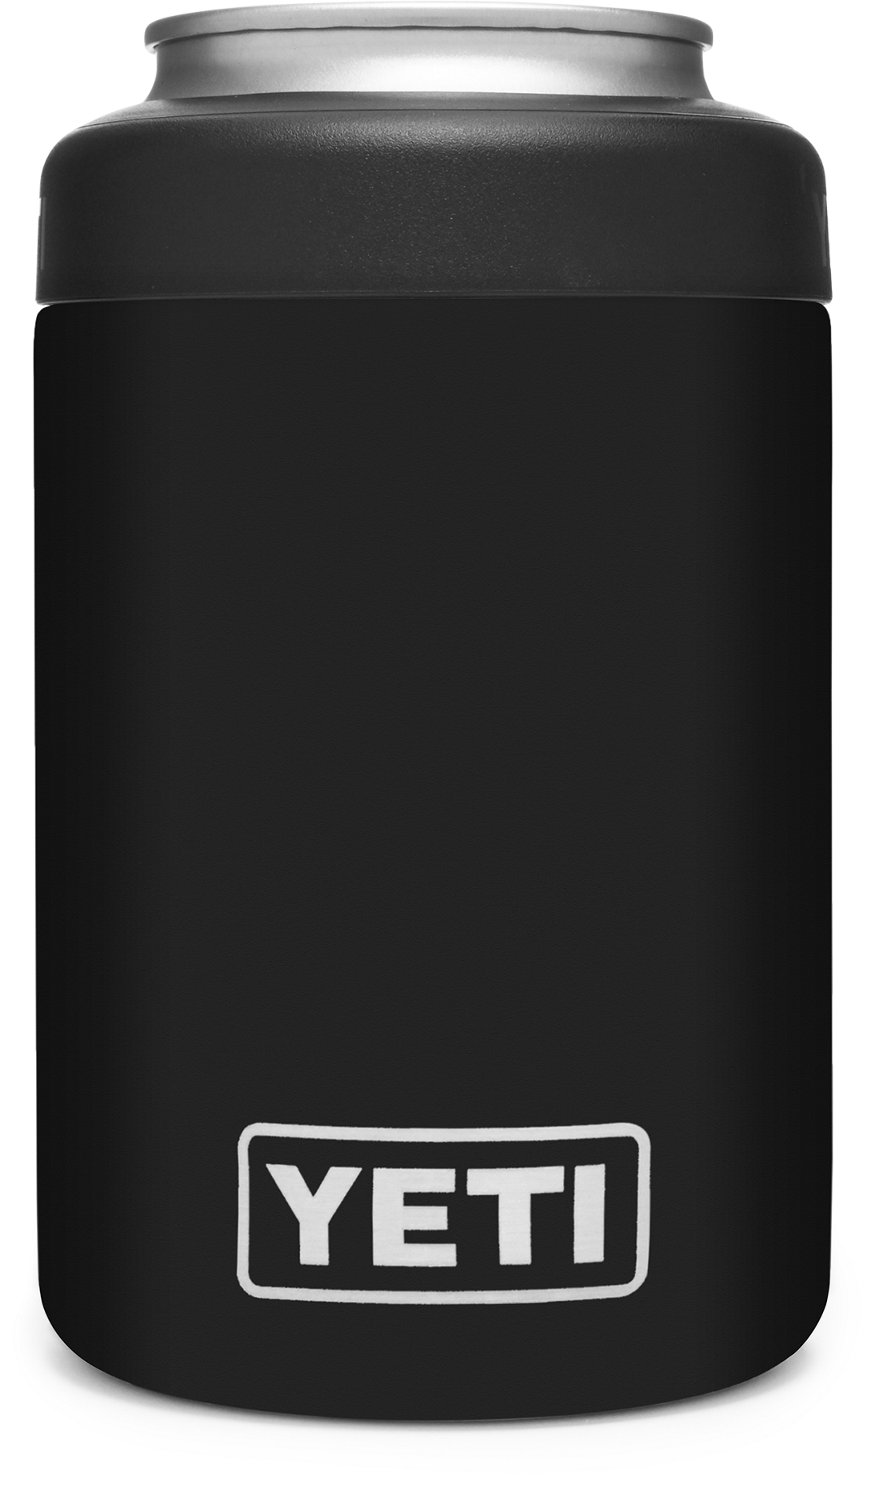 https://academy.scene7.com/is/image/academy//drinkware/yeti-rambler-colster-20-drink-holder-21071501577-black/4a5d04562cdb4a329d8fa29100462eaf?$pdp-gallery-ng$